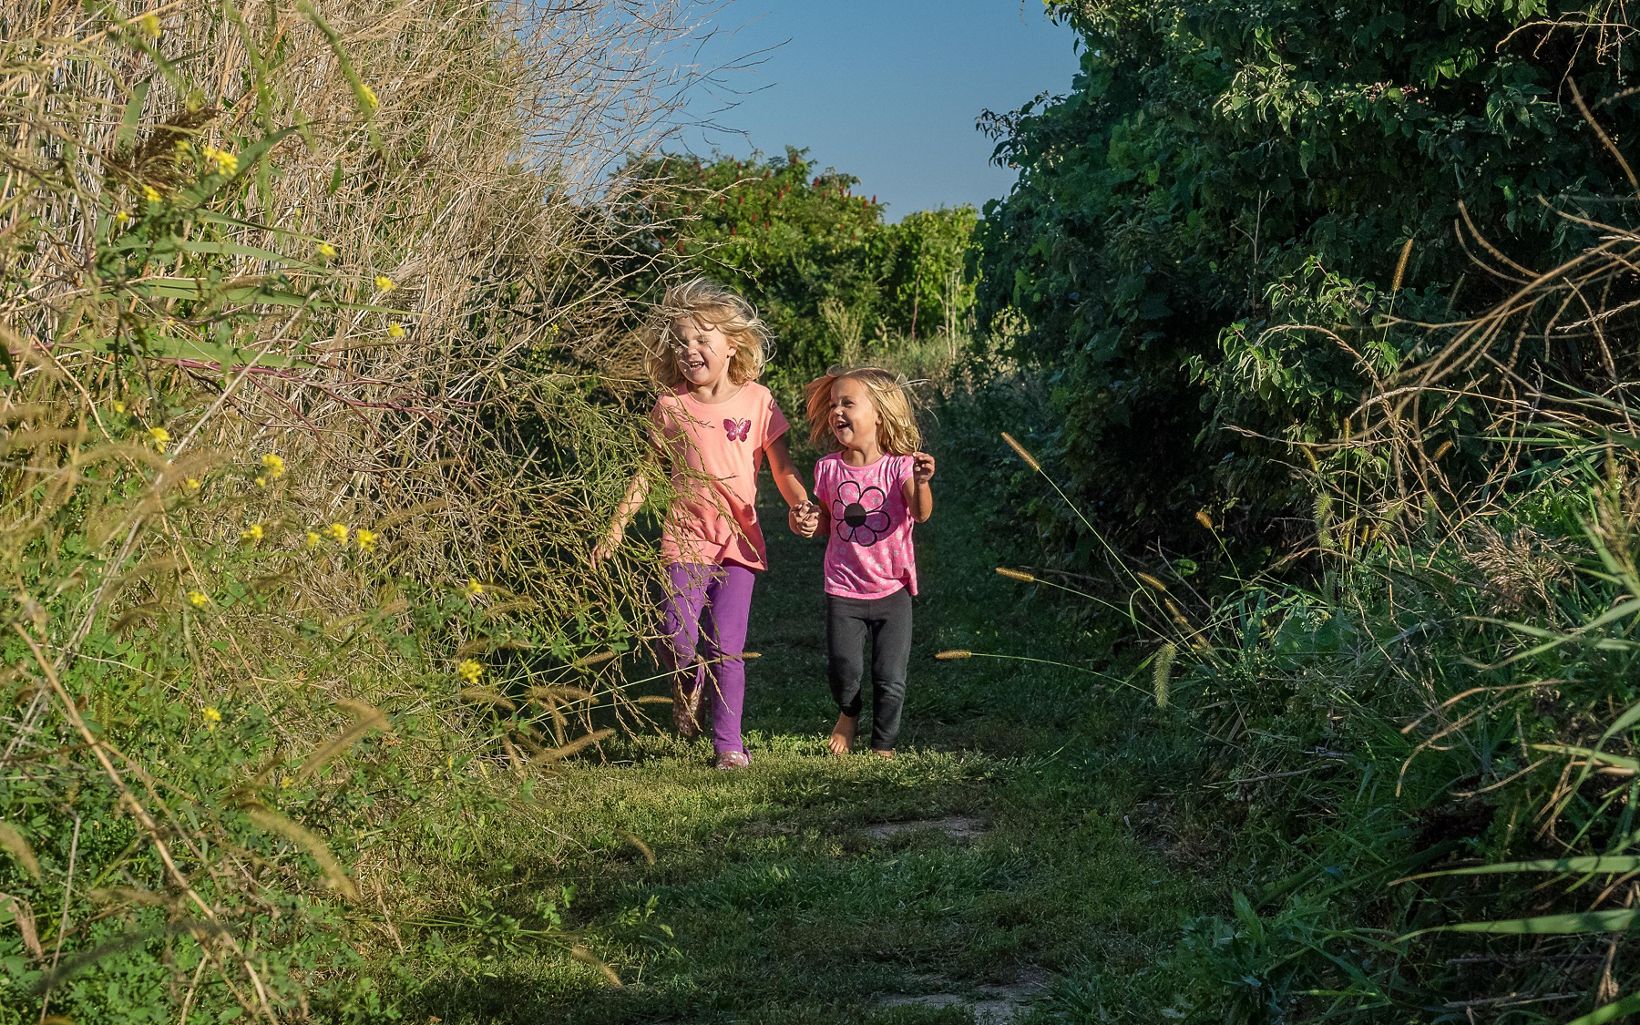 Two children running on a path surrounded by tall grasses.